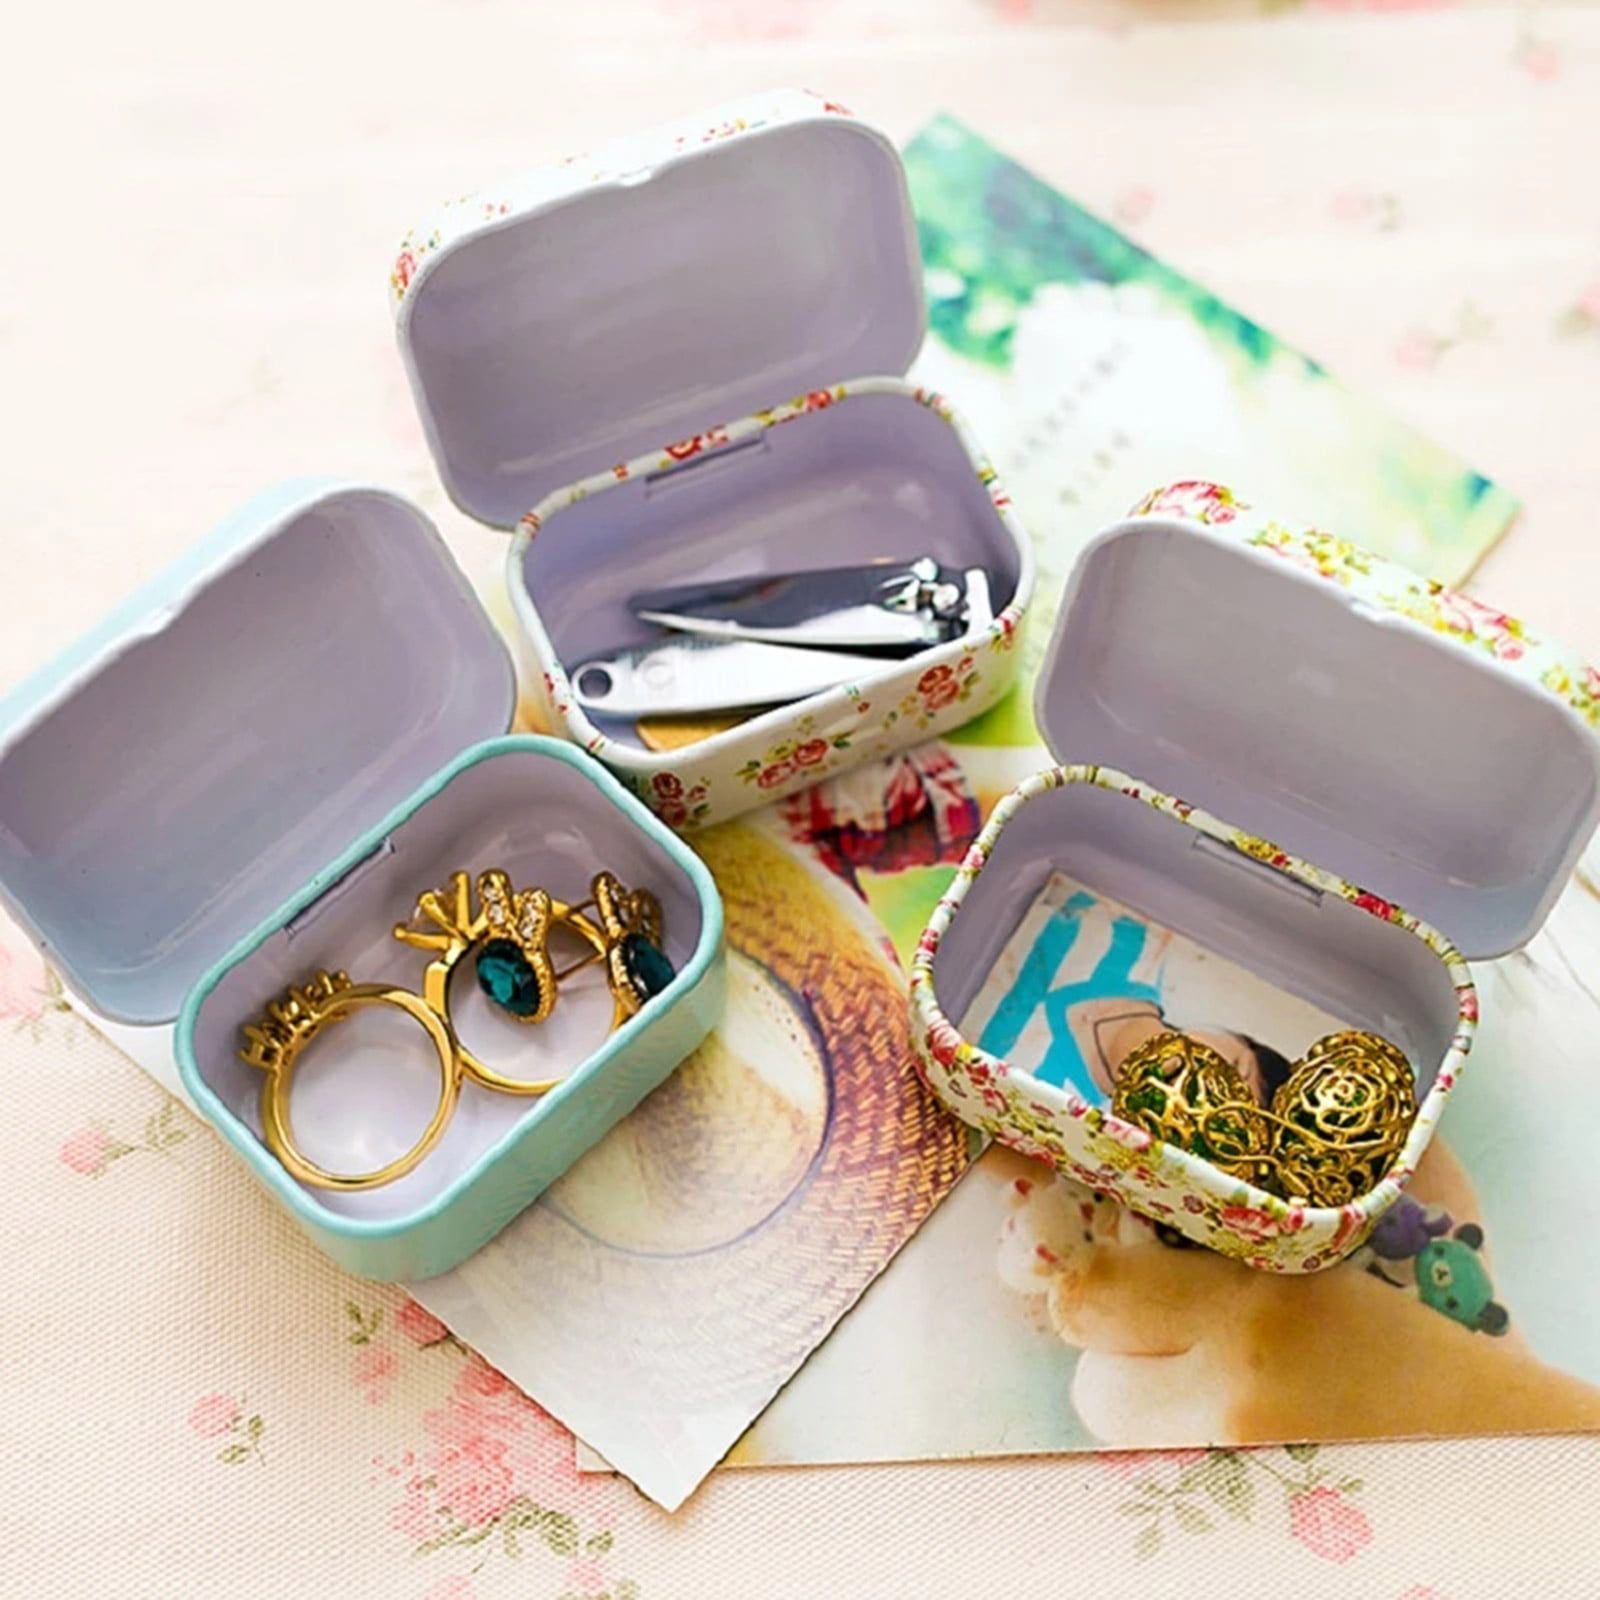  COHEALI 8 Pcs Tinplate Candy Tins Tin Containers with Lids  Rectangular Empty Tins Mini Trinket Tin Crafts Holder Case Jewelry Storage  Containers Holiday Candy Tins Metal Can Tin Box